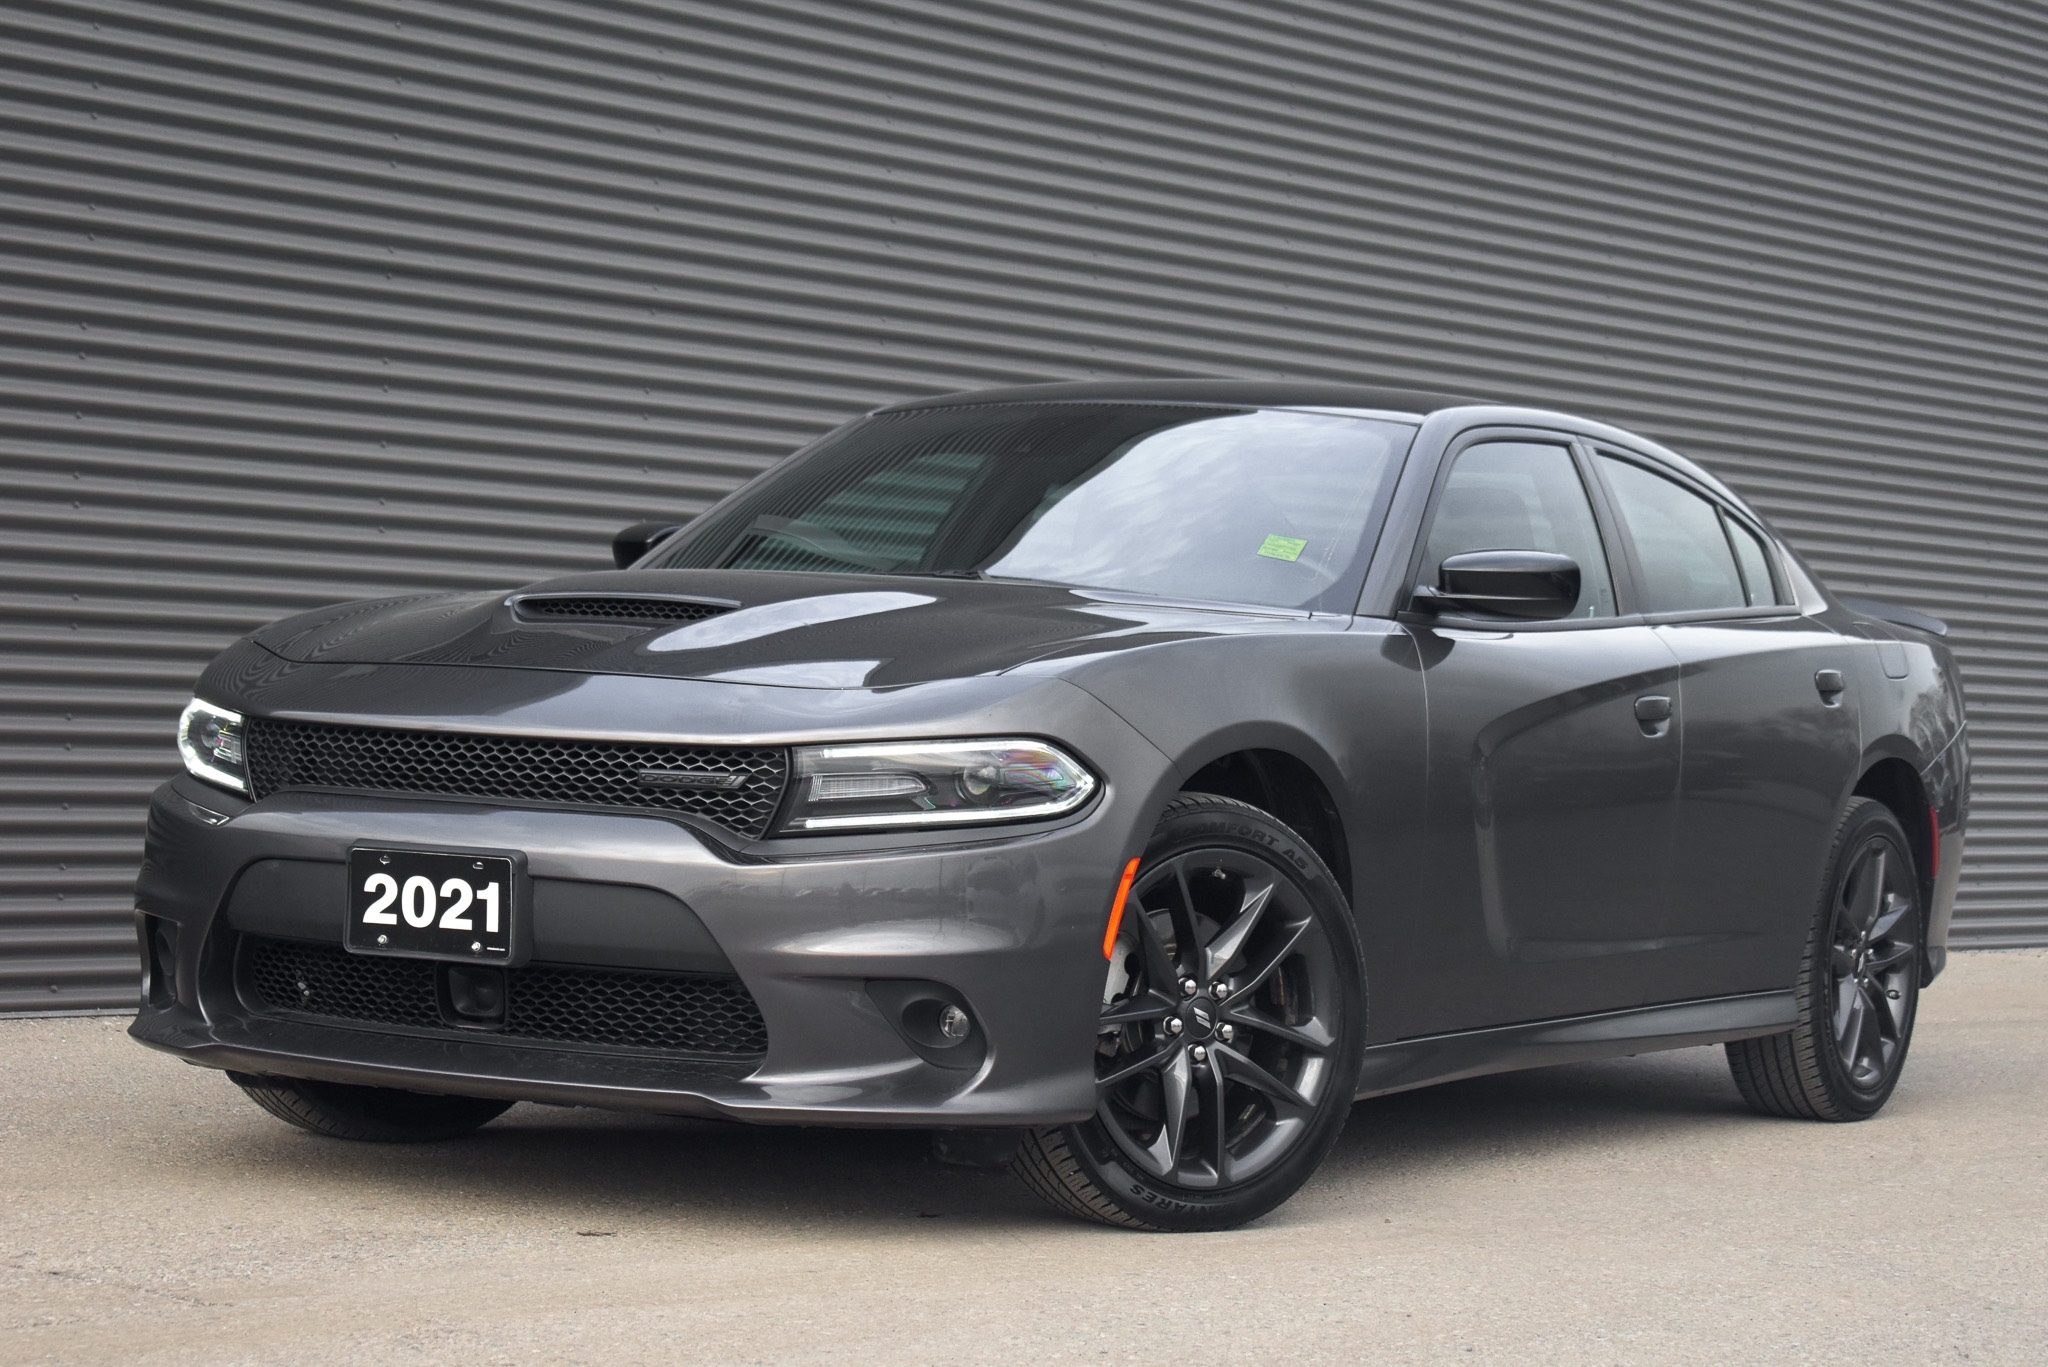 2021 Dodge Charger GT Granite Pearl Exterior Colour, Full Size Car, G